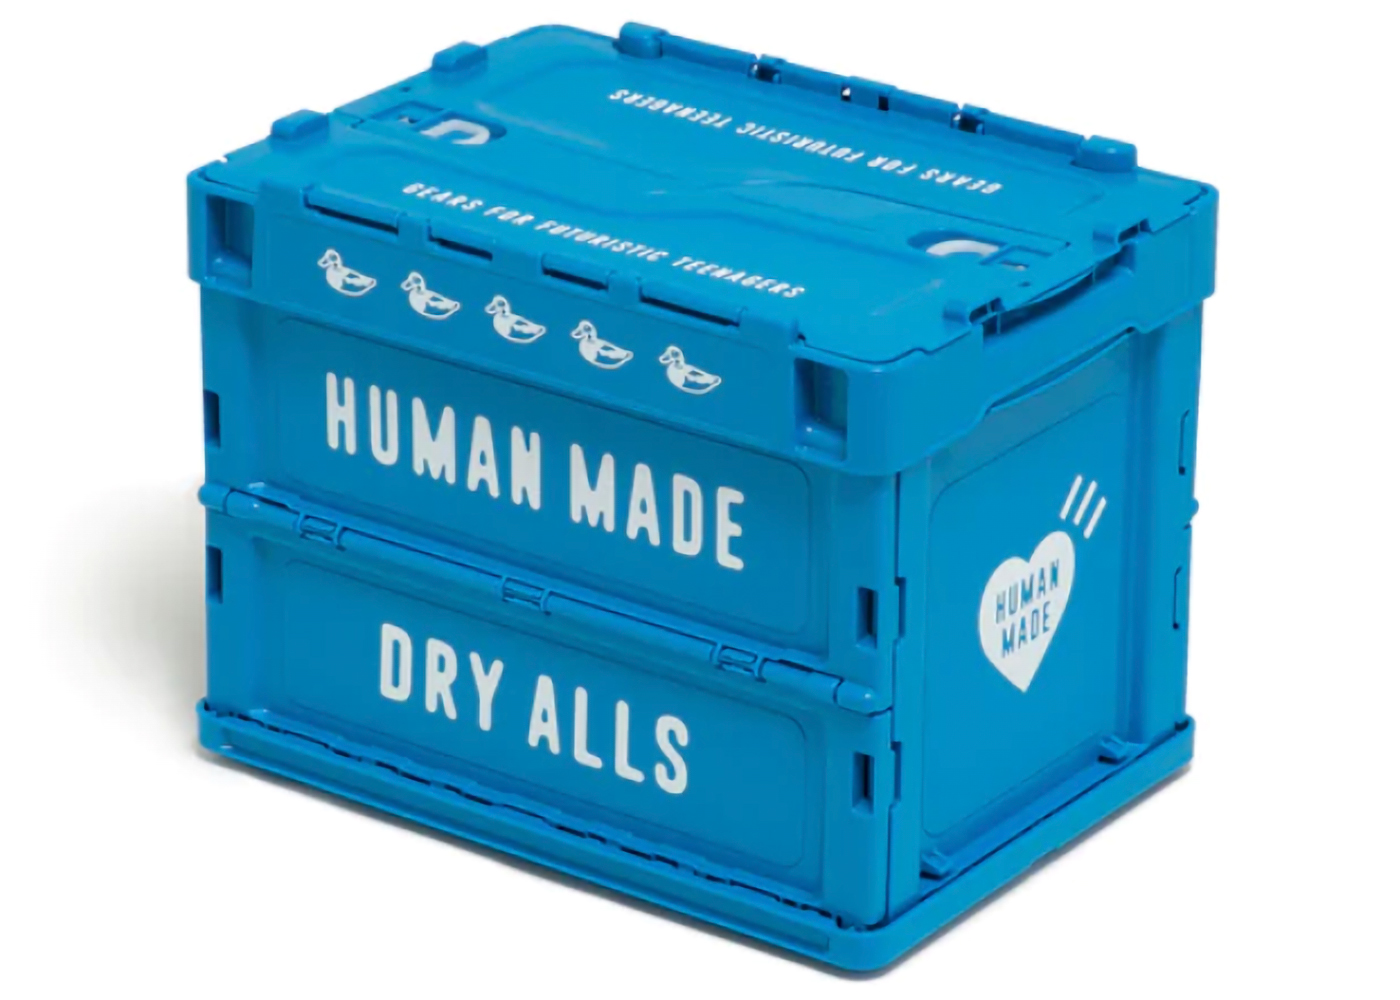 HUMAN MADE CONTAINER 20L BLUE